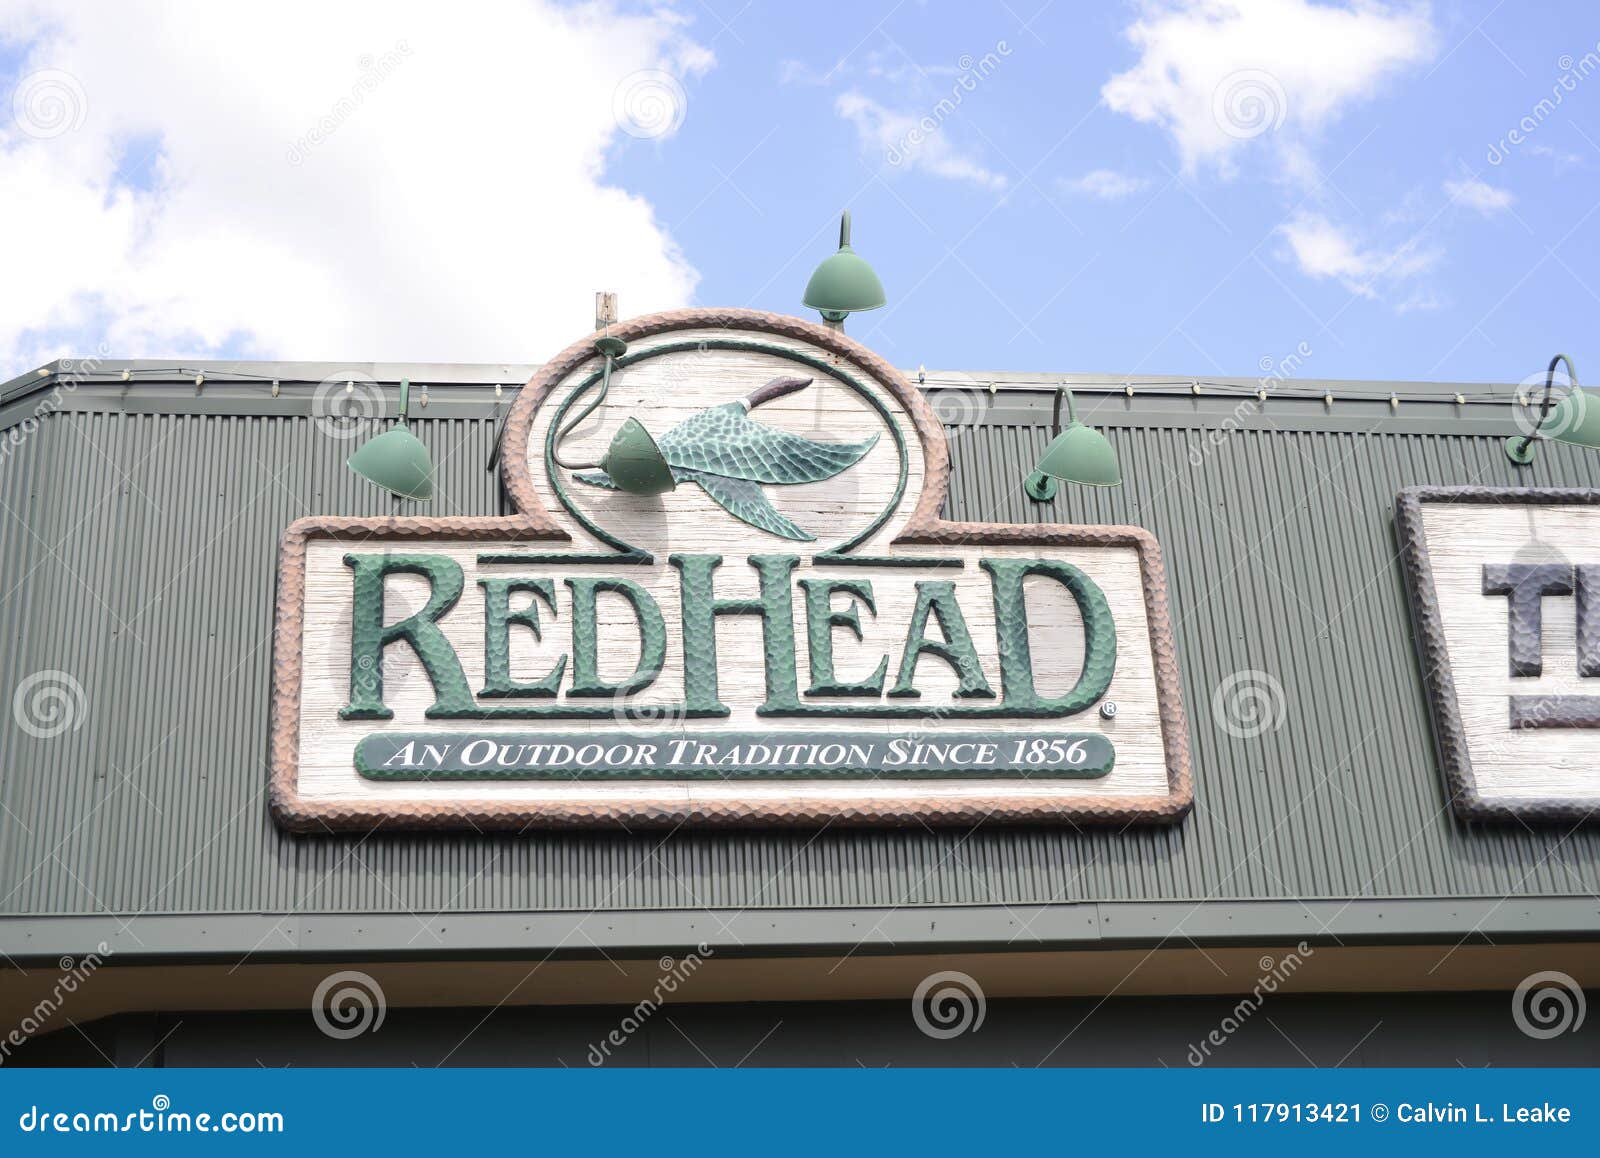 Redhead Clothing at Bass Pro Shops Editorial Photo - Image of lure